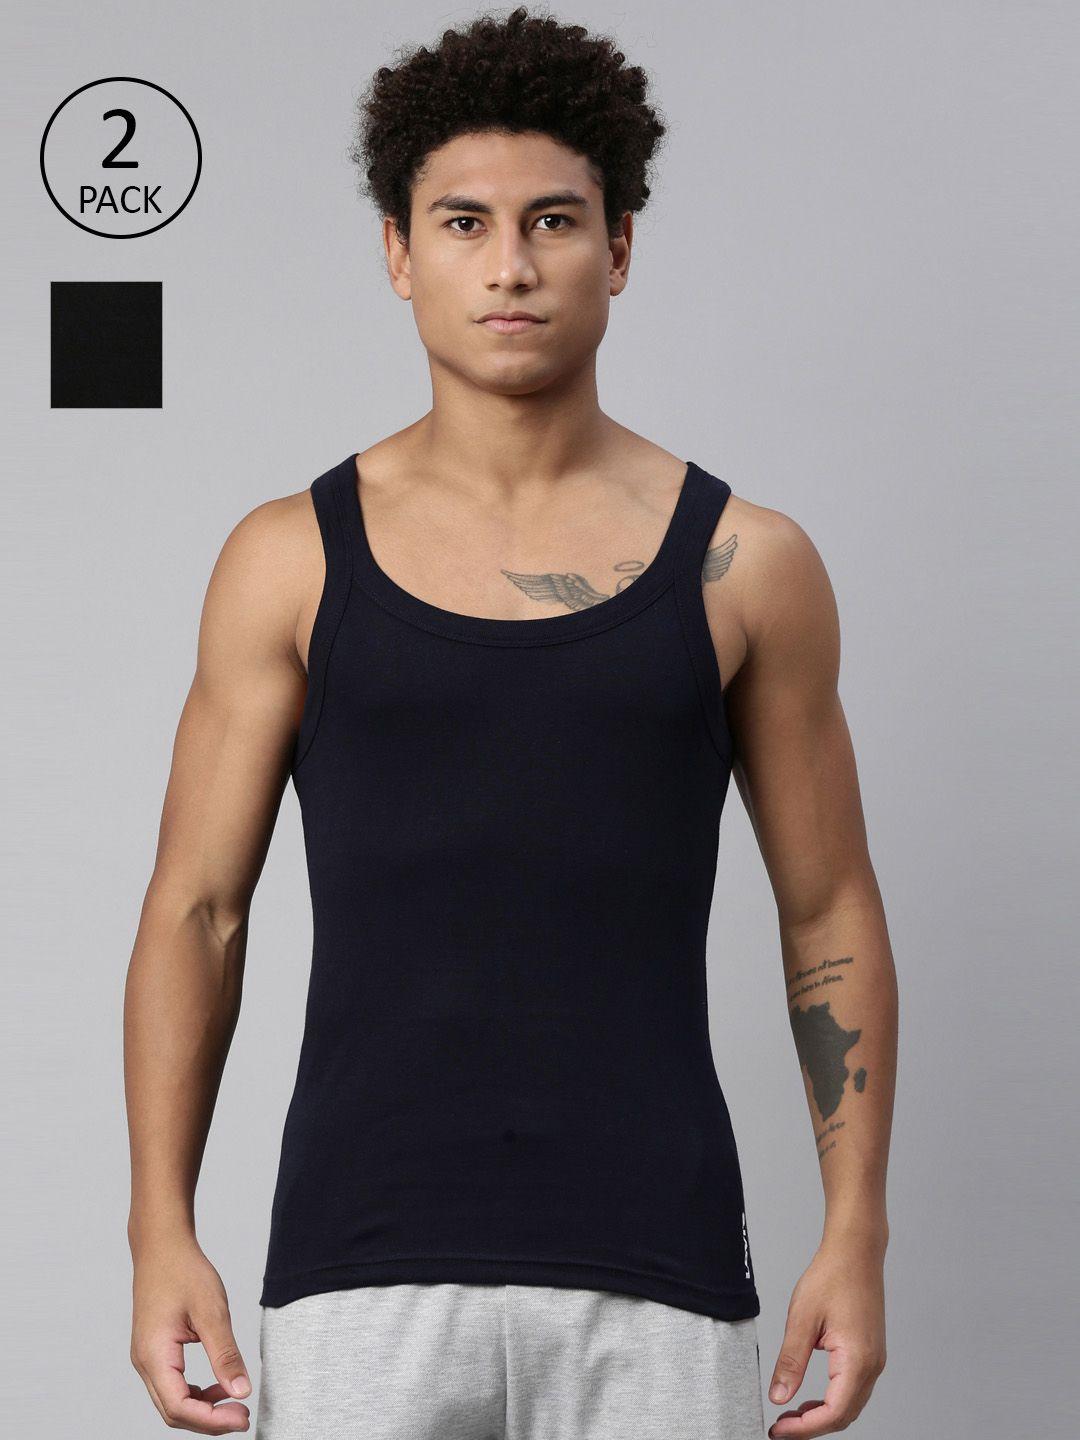 levis-men-pack-of-2-smartskin-technology-cotton-sports-vests-with-tag-free-comfort-015